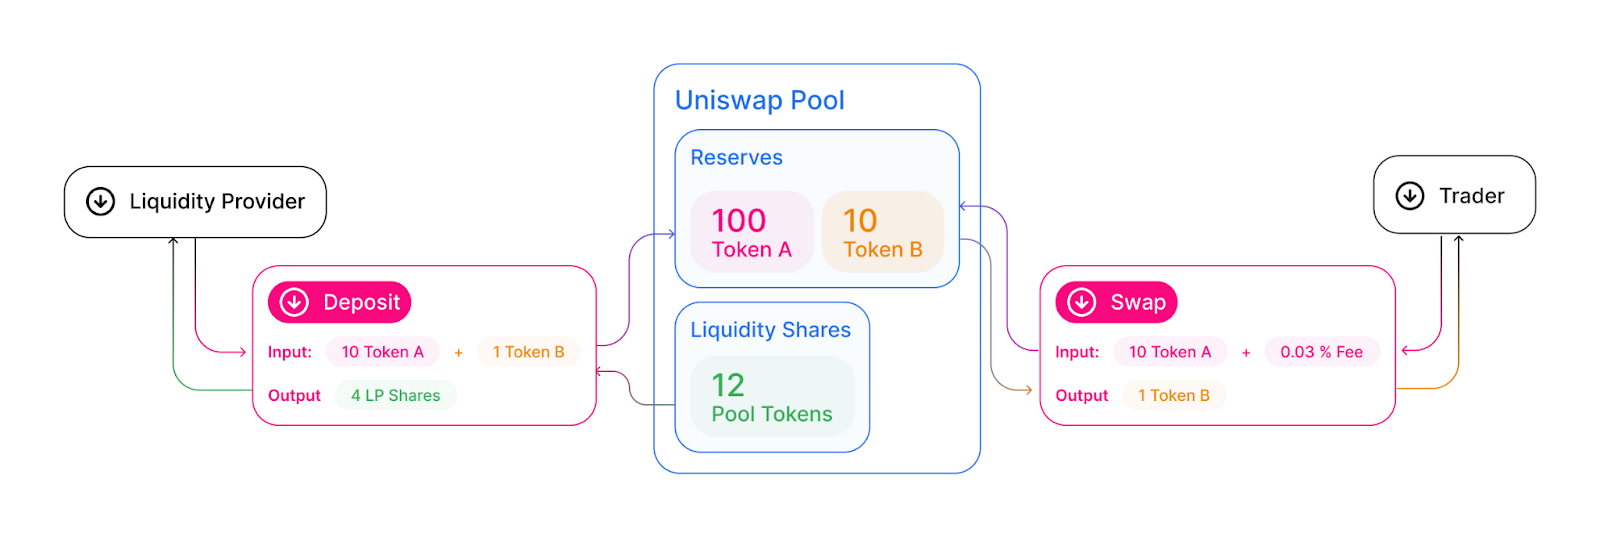 An image that shows how Uniswap’s liquidity pools work.